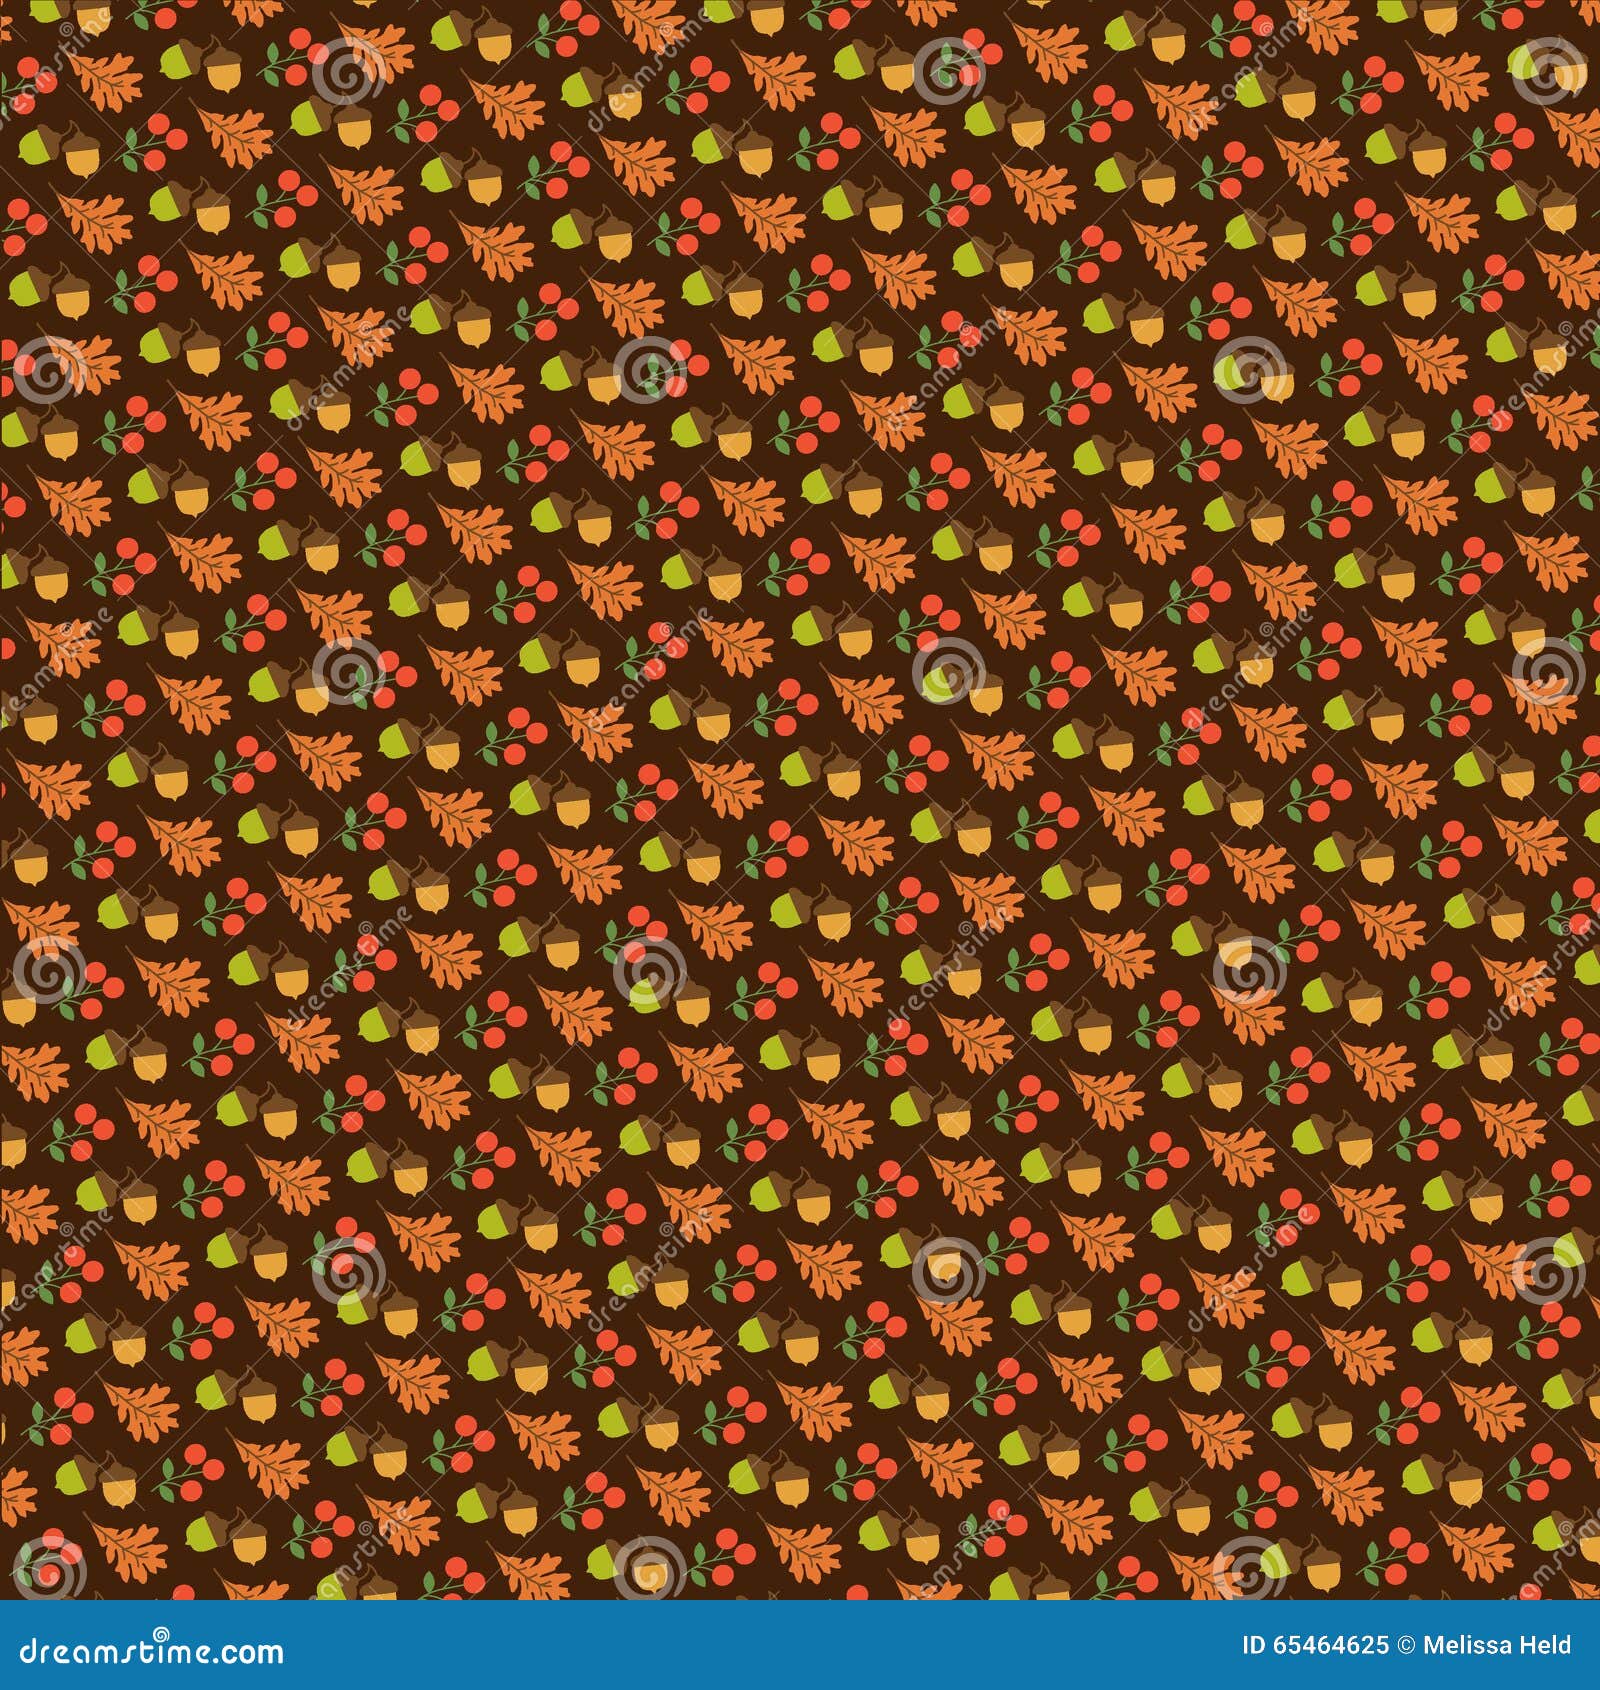 Acorns and oak leaves brown background pattern